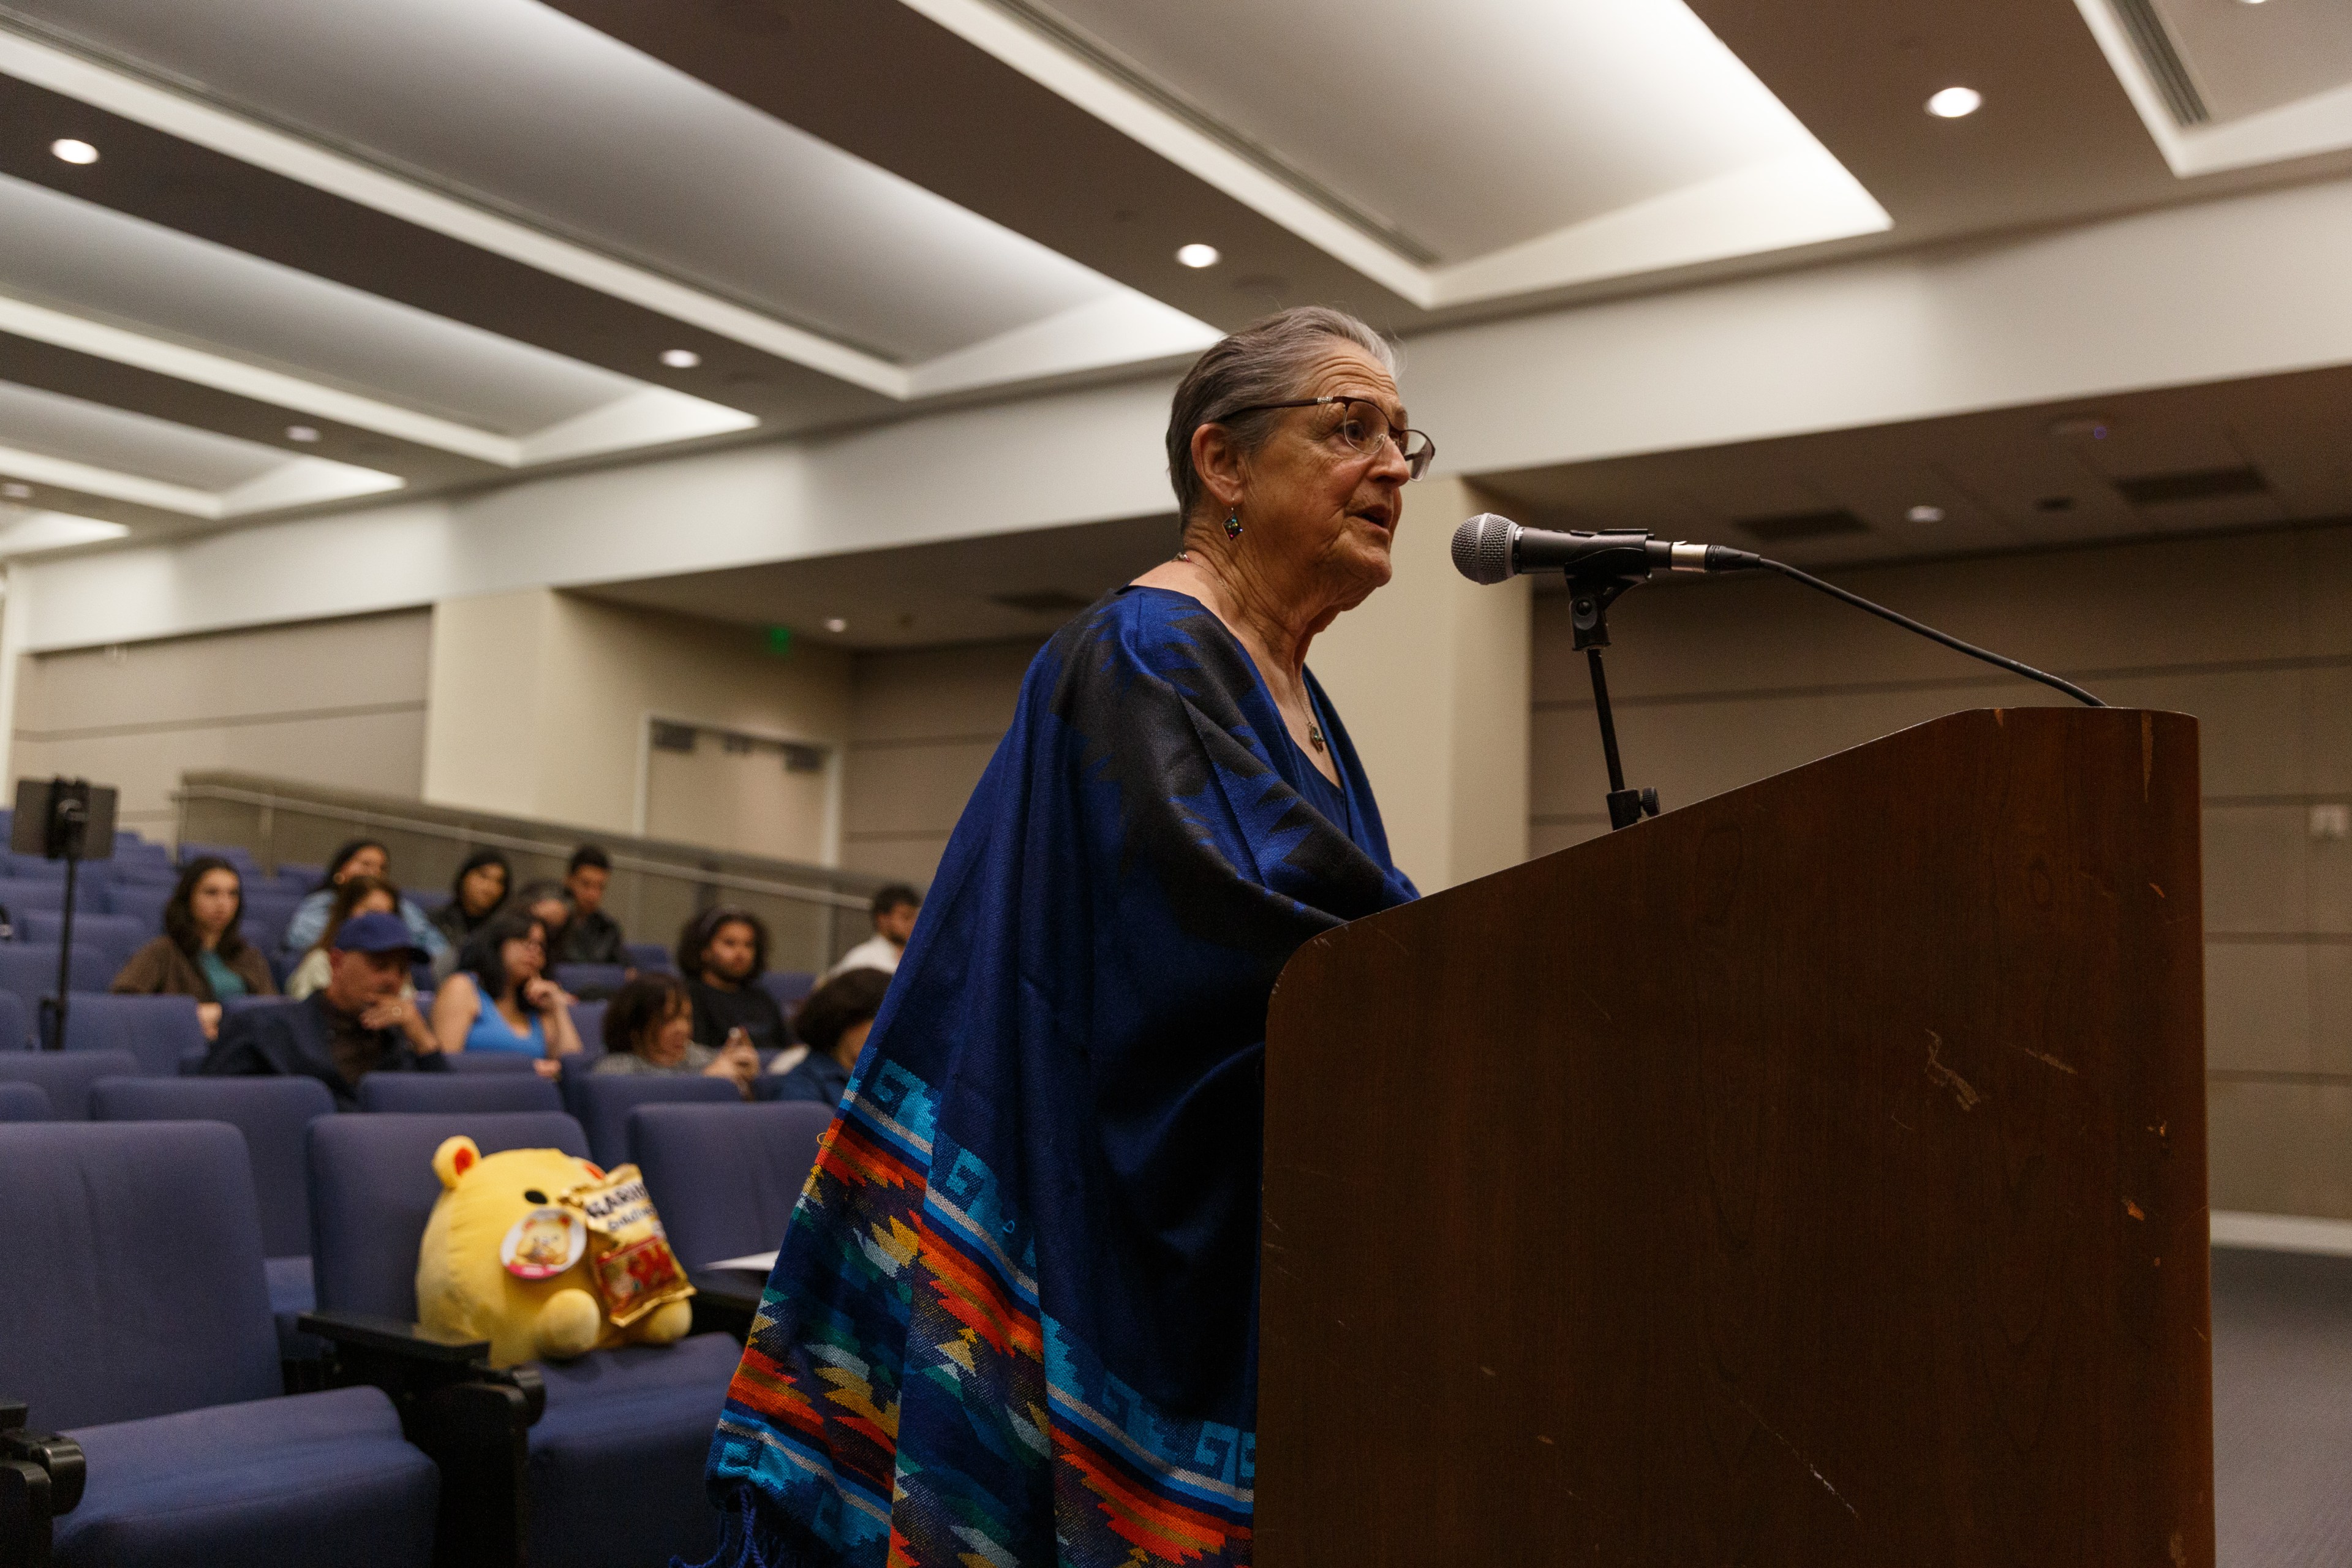 An elderly woman speaks at a podium in a lecture hall with an audience behind her.